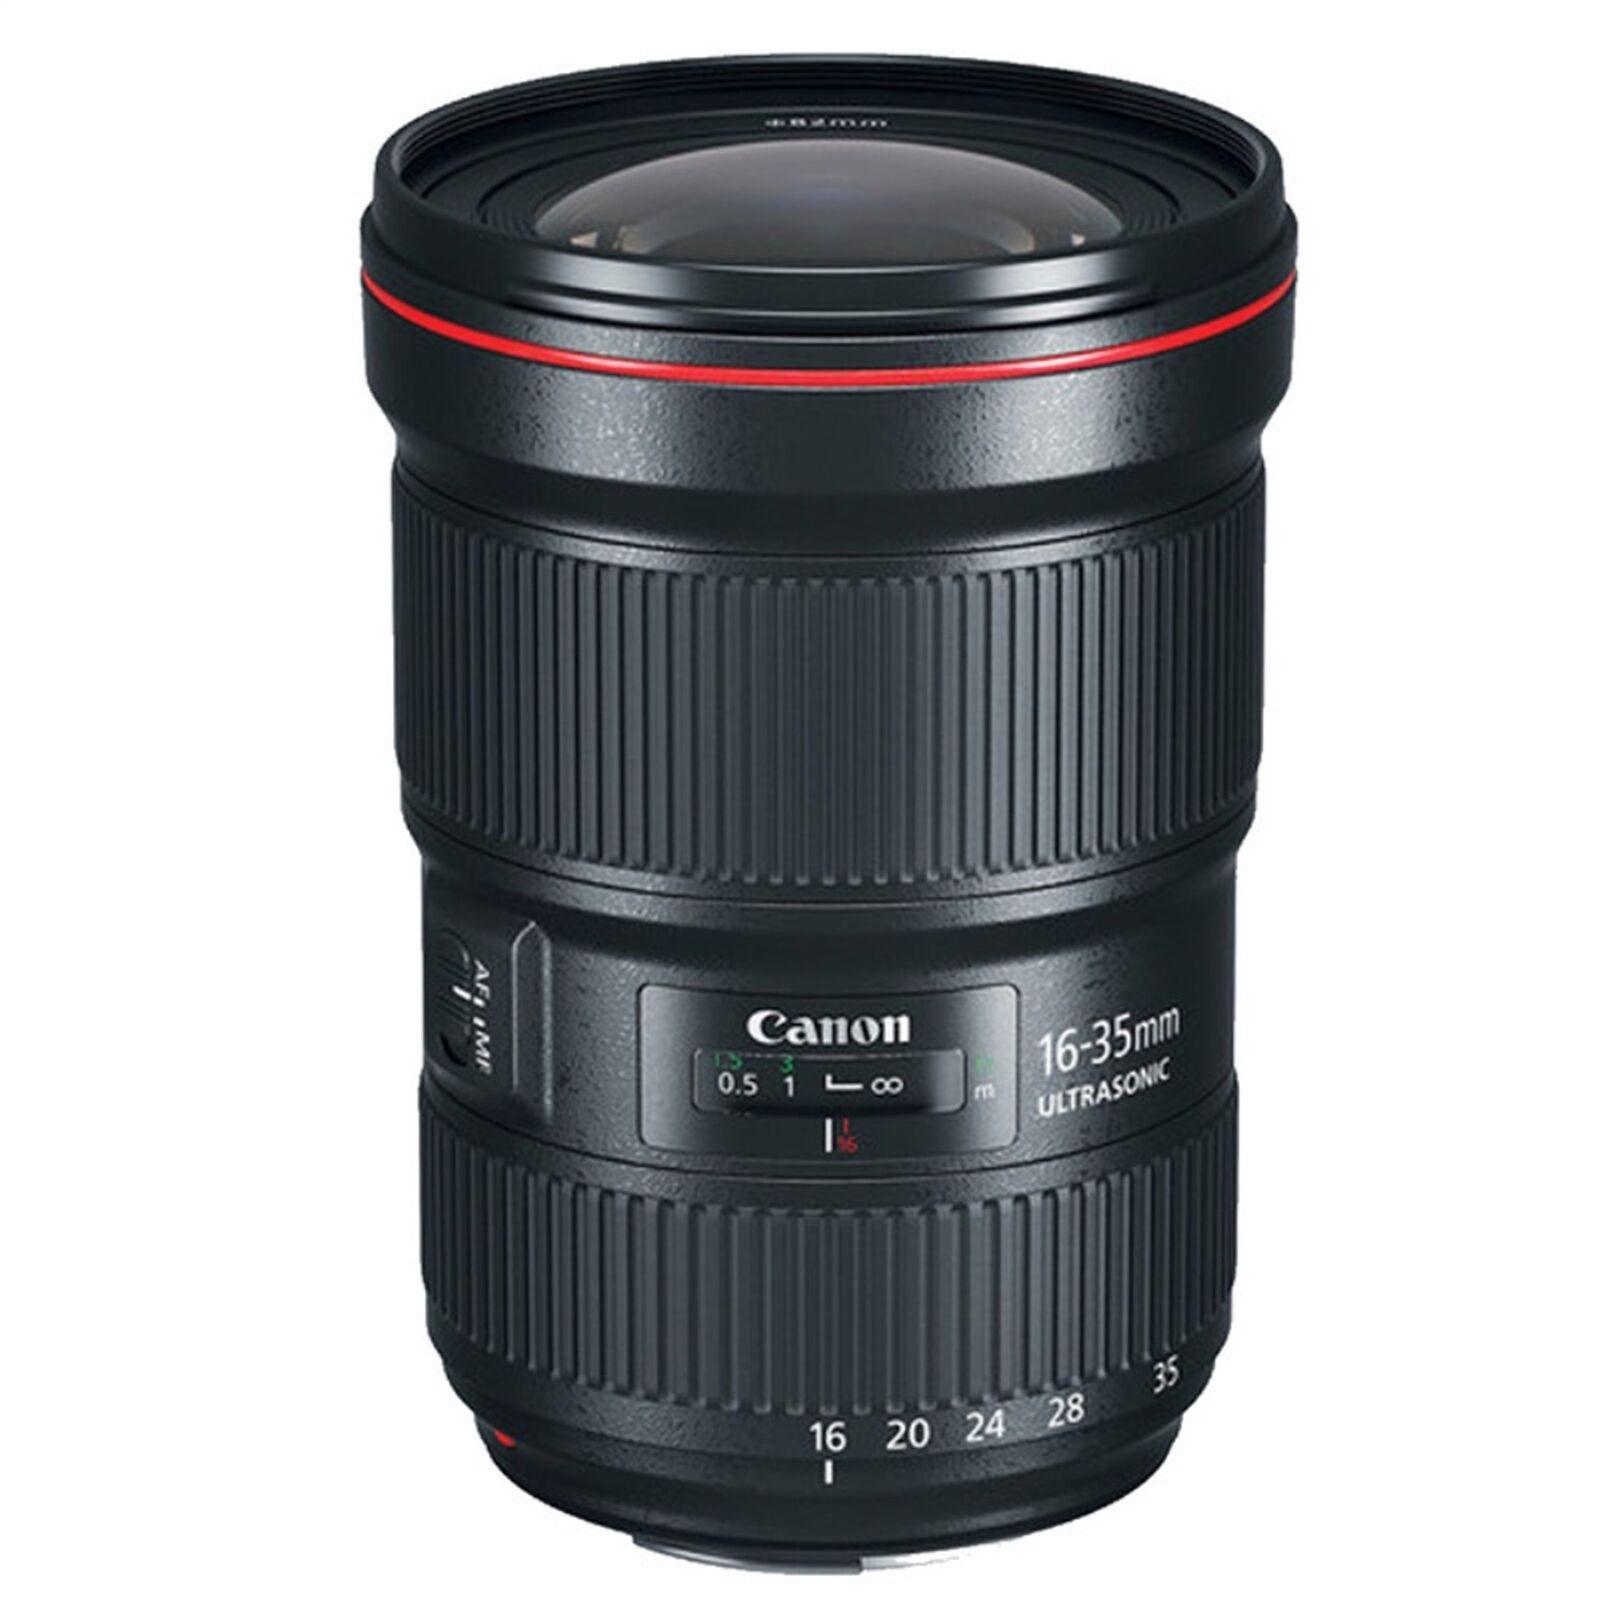 Canon EF 16-35mm f/2.8L III USM Lens with UV and Cleaning Accessory Kit